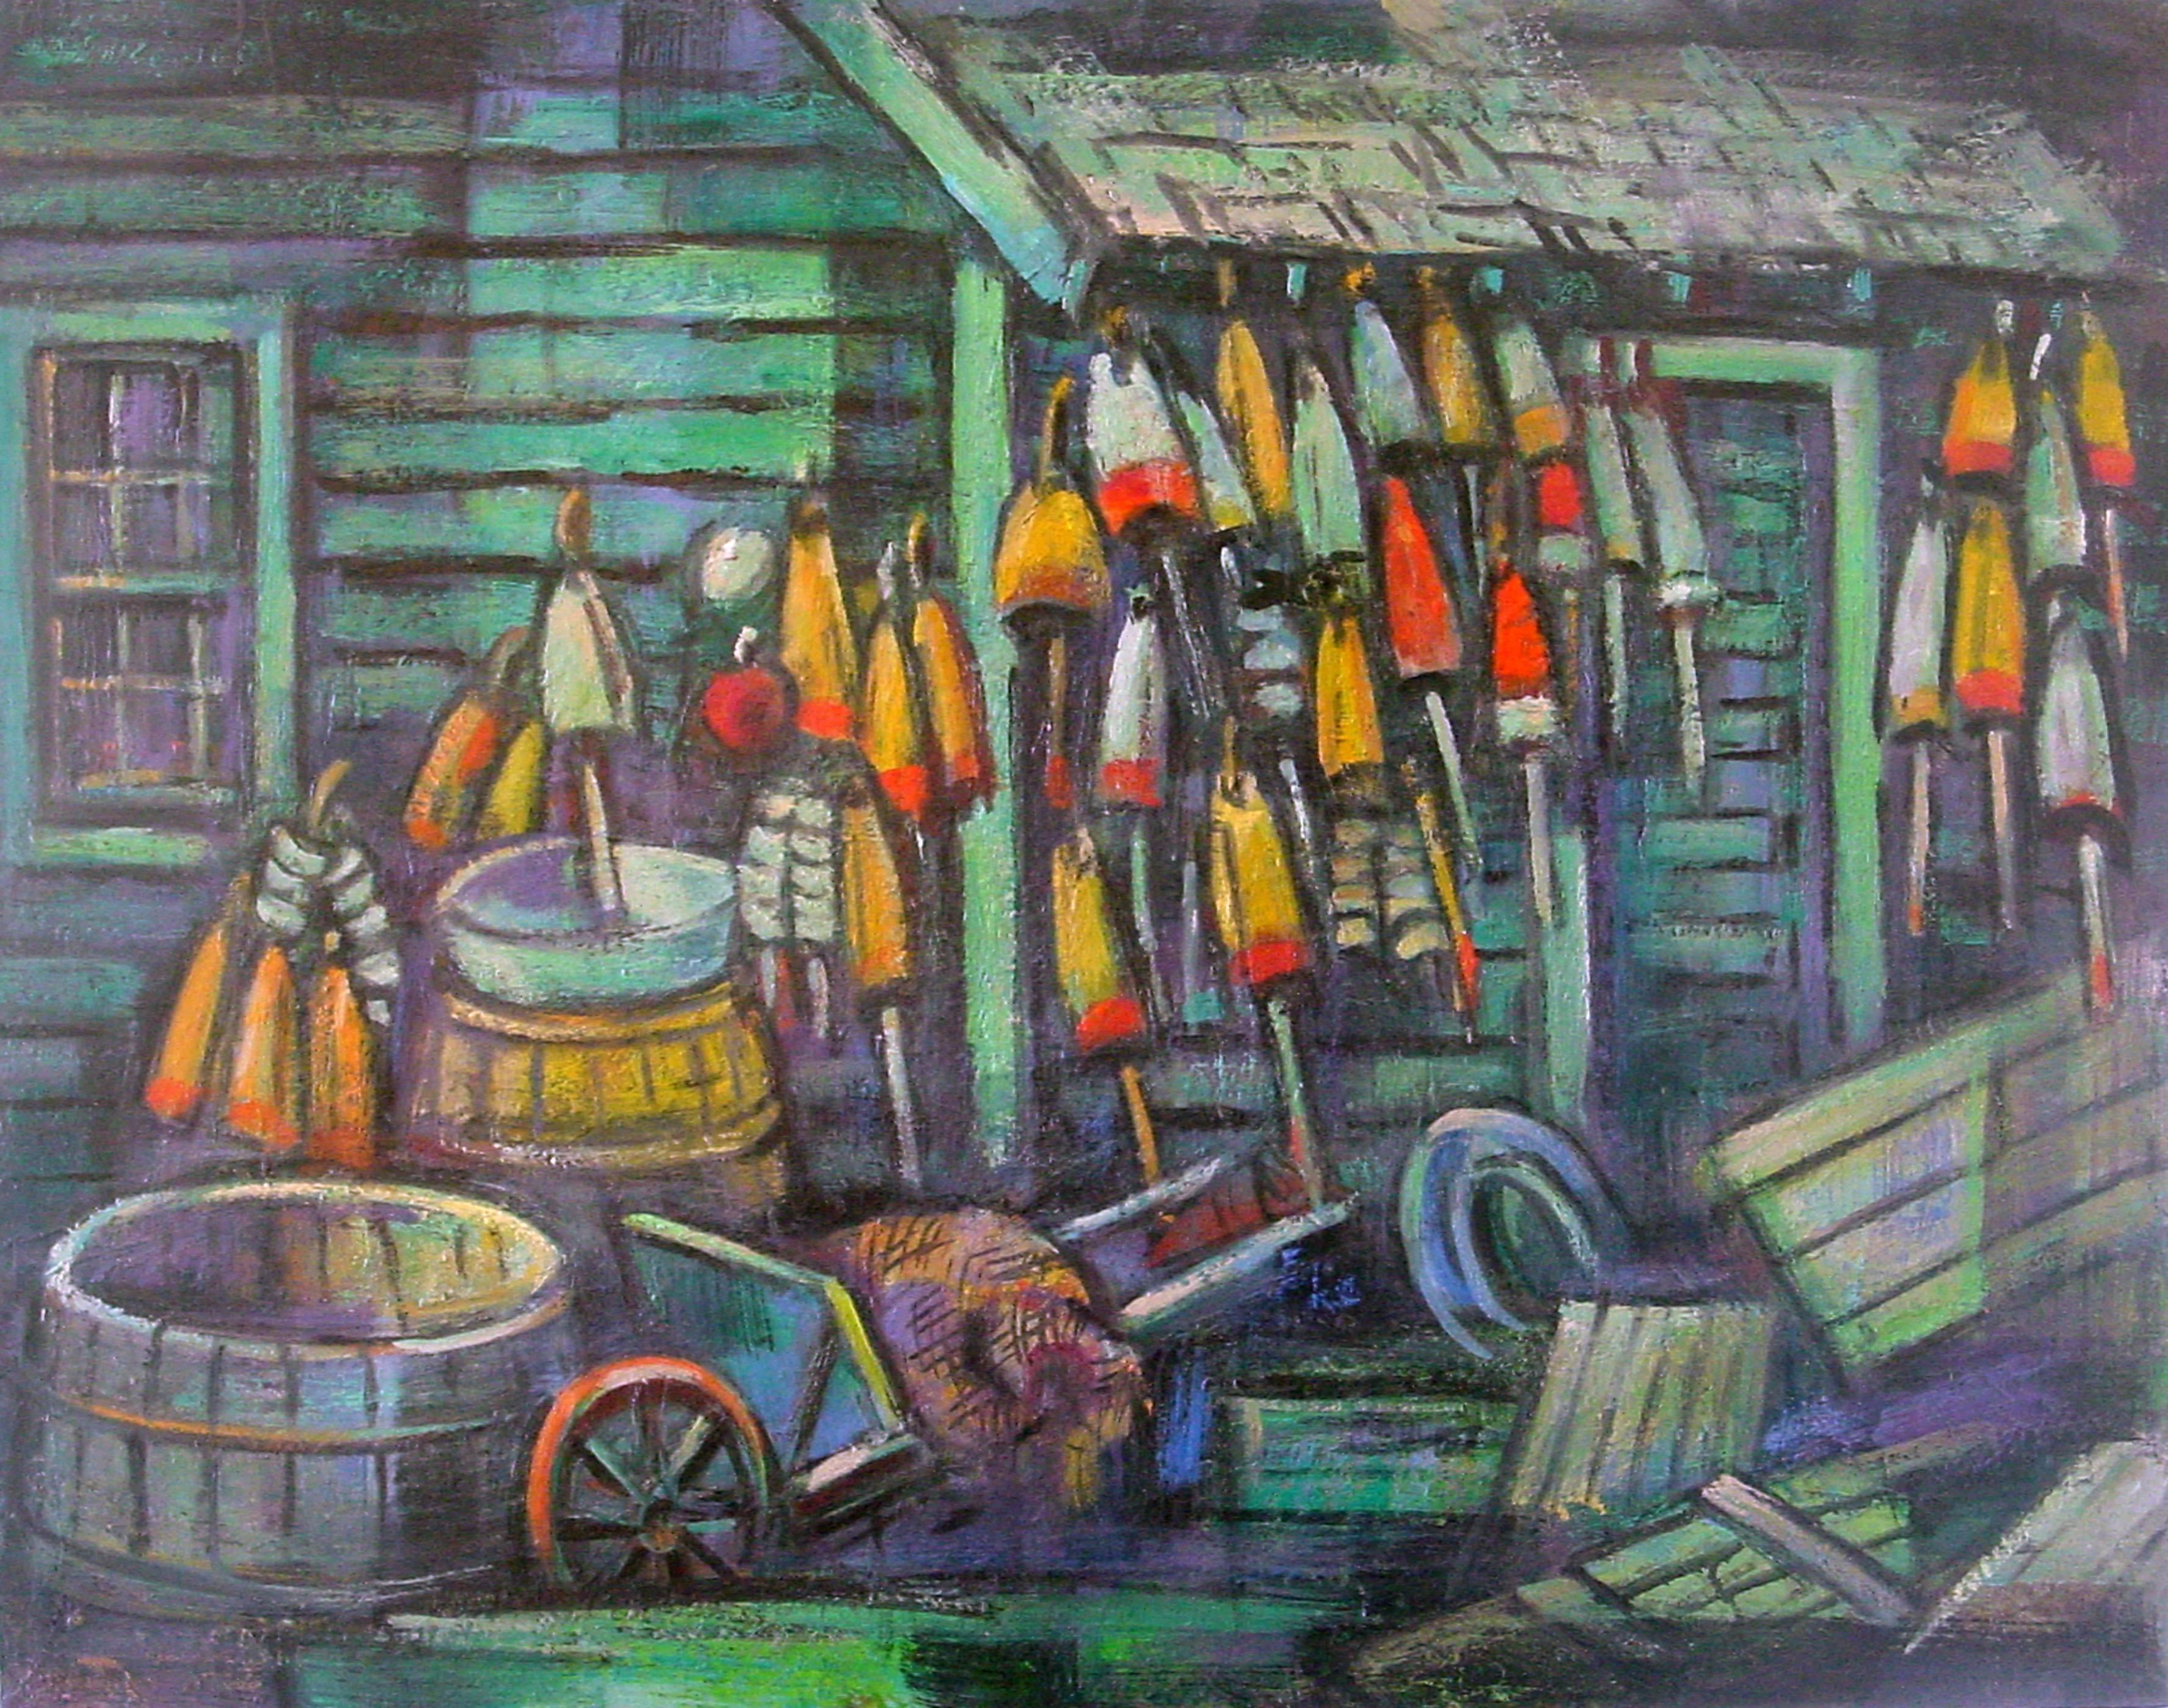 Buoys and Barrells - Painting by Emil Holzhauer